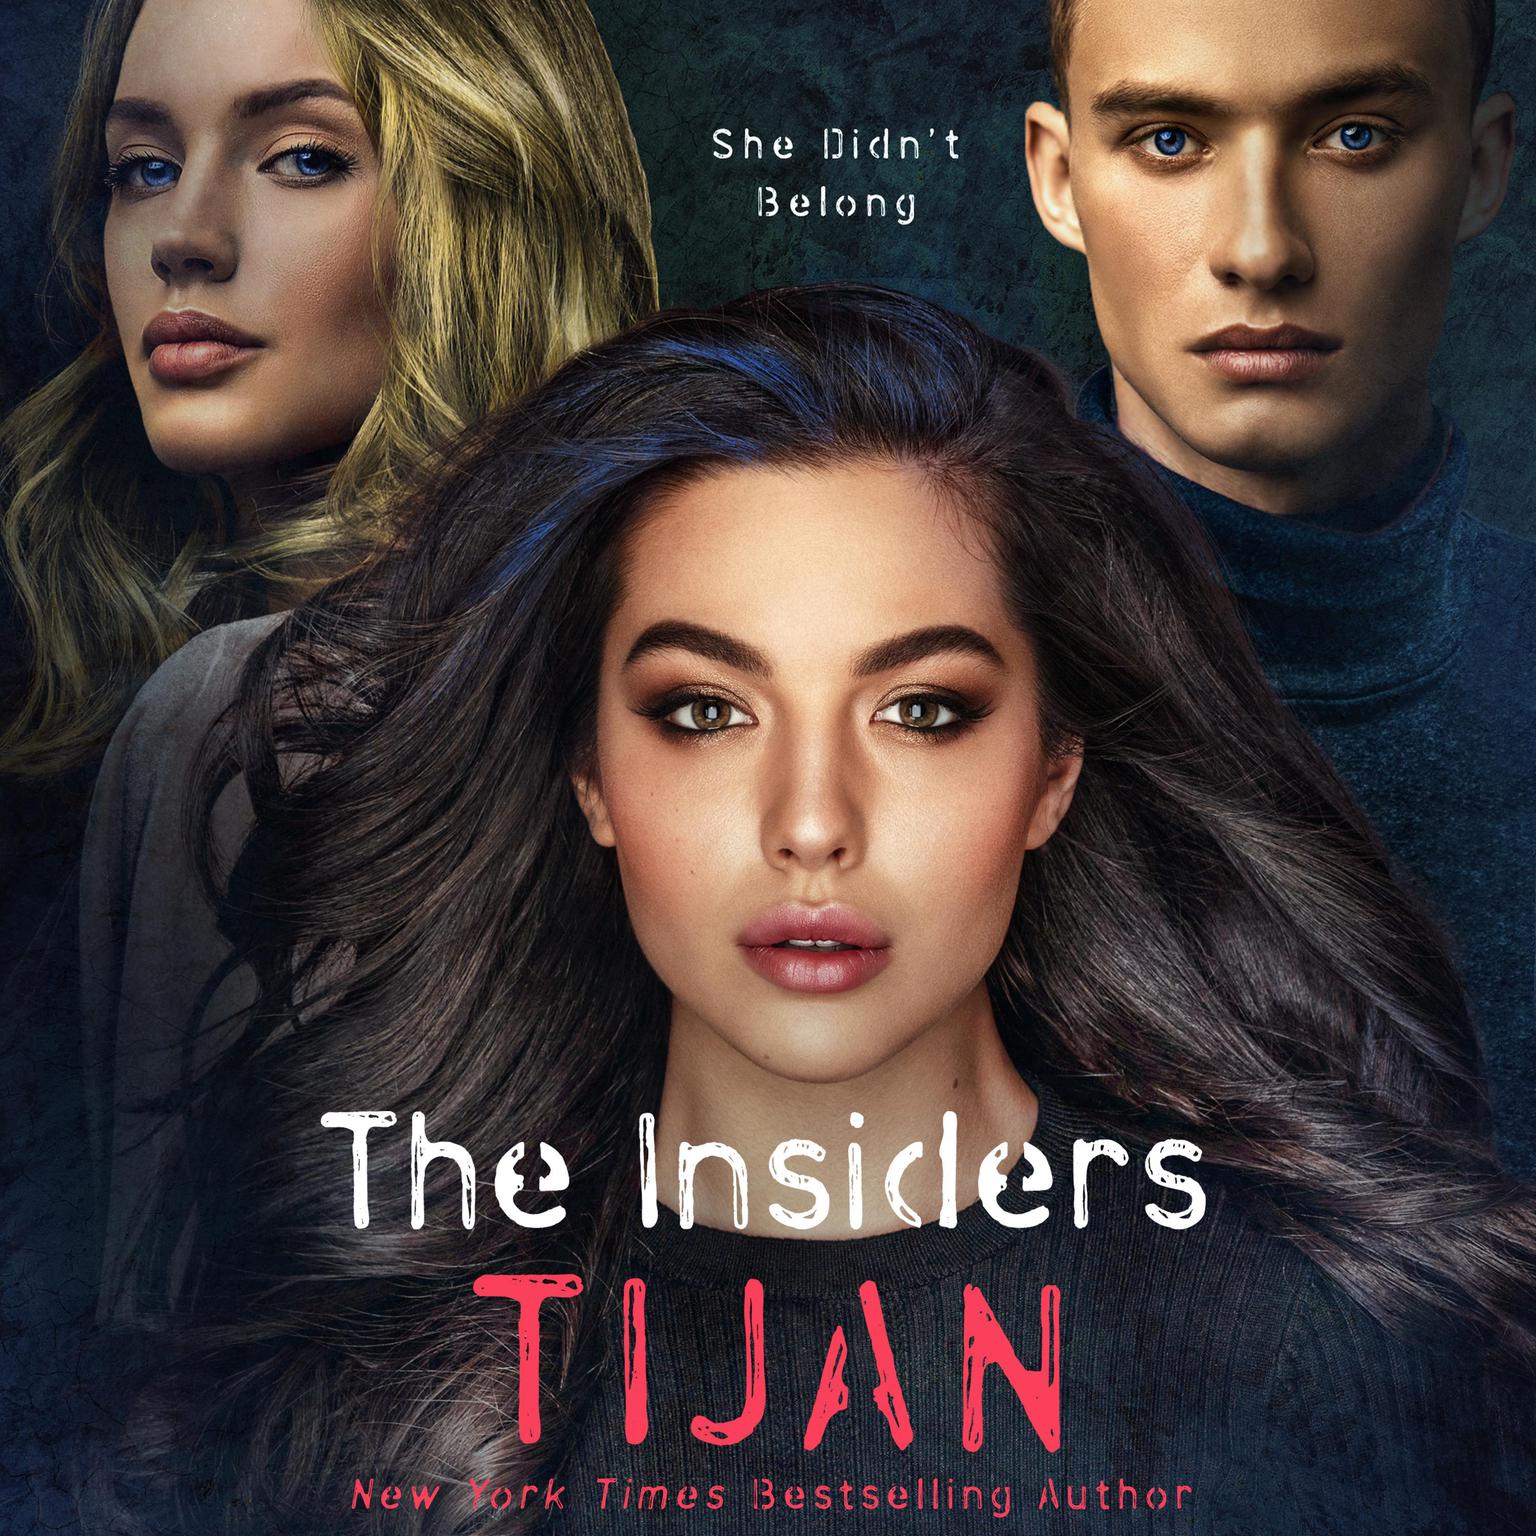 The Insiders Audiobook, by Tijan